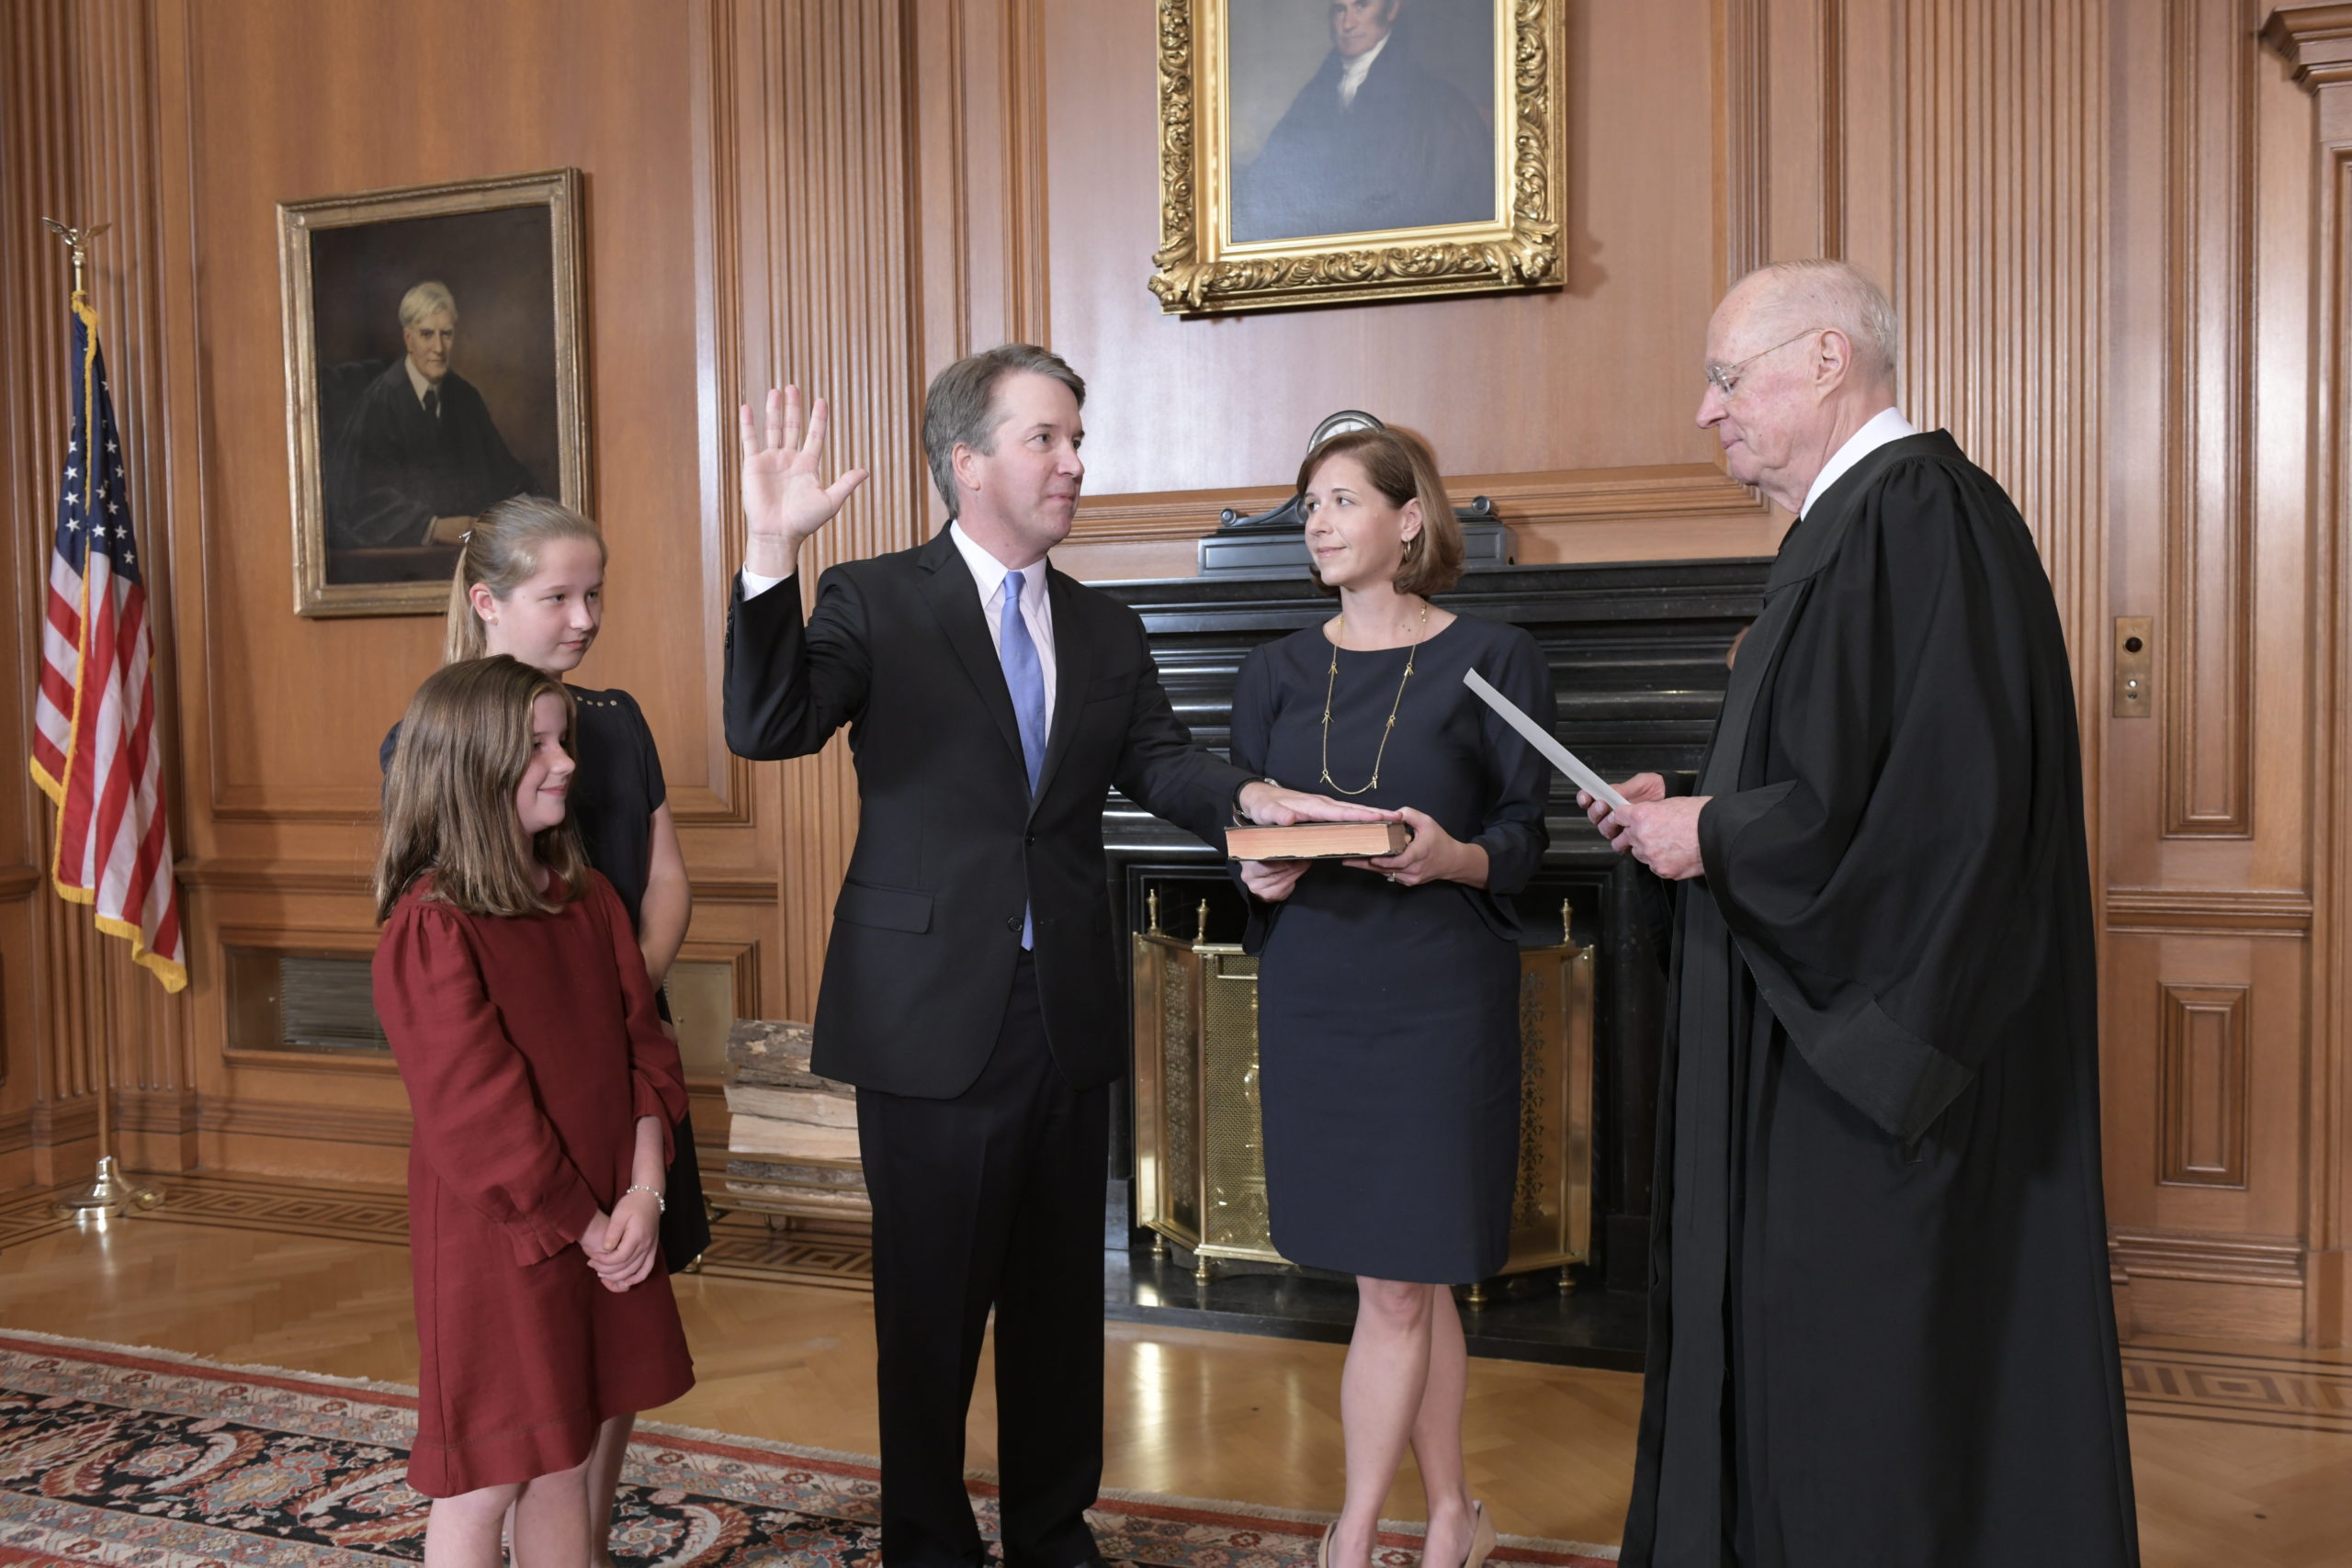 In this handout photo provided by the Supreme Court of the United States, Justice Anthony M. Kennedy, (Retired) administers the Judicial Oath to Judge Brett M. Kavanaugh. (Fred Schilling/Supreme Court of the United States via Getty Images)